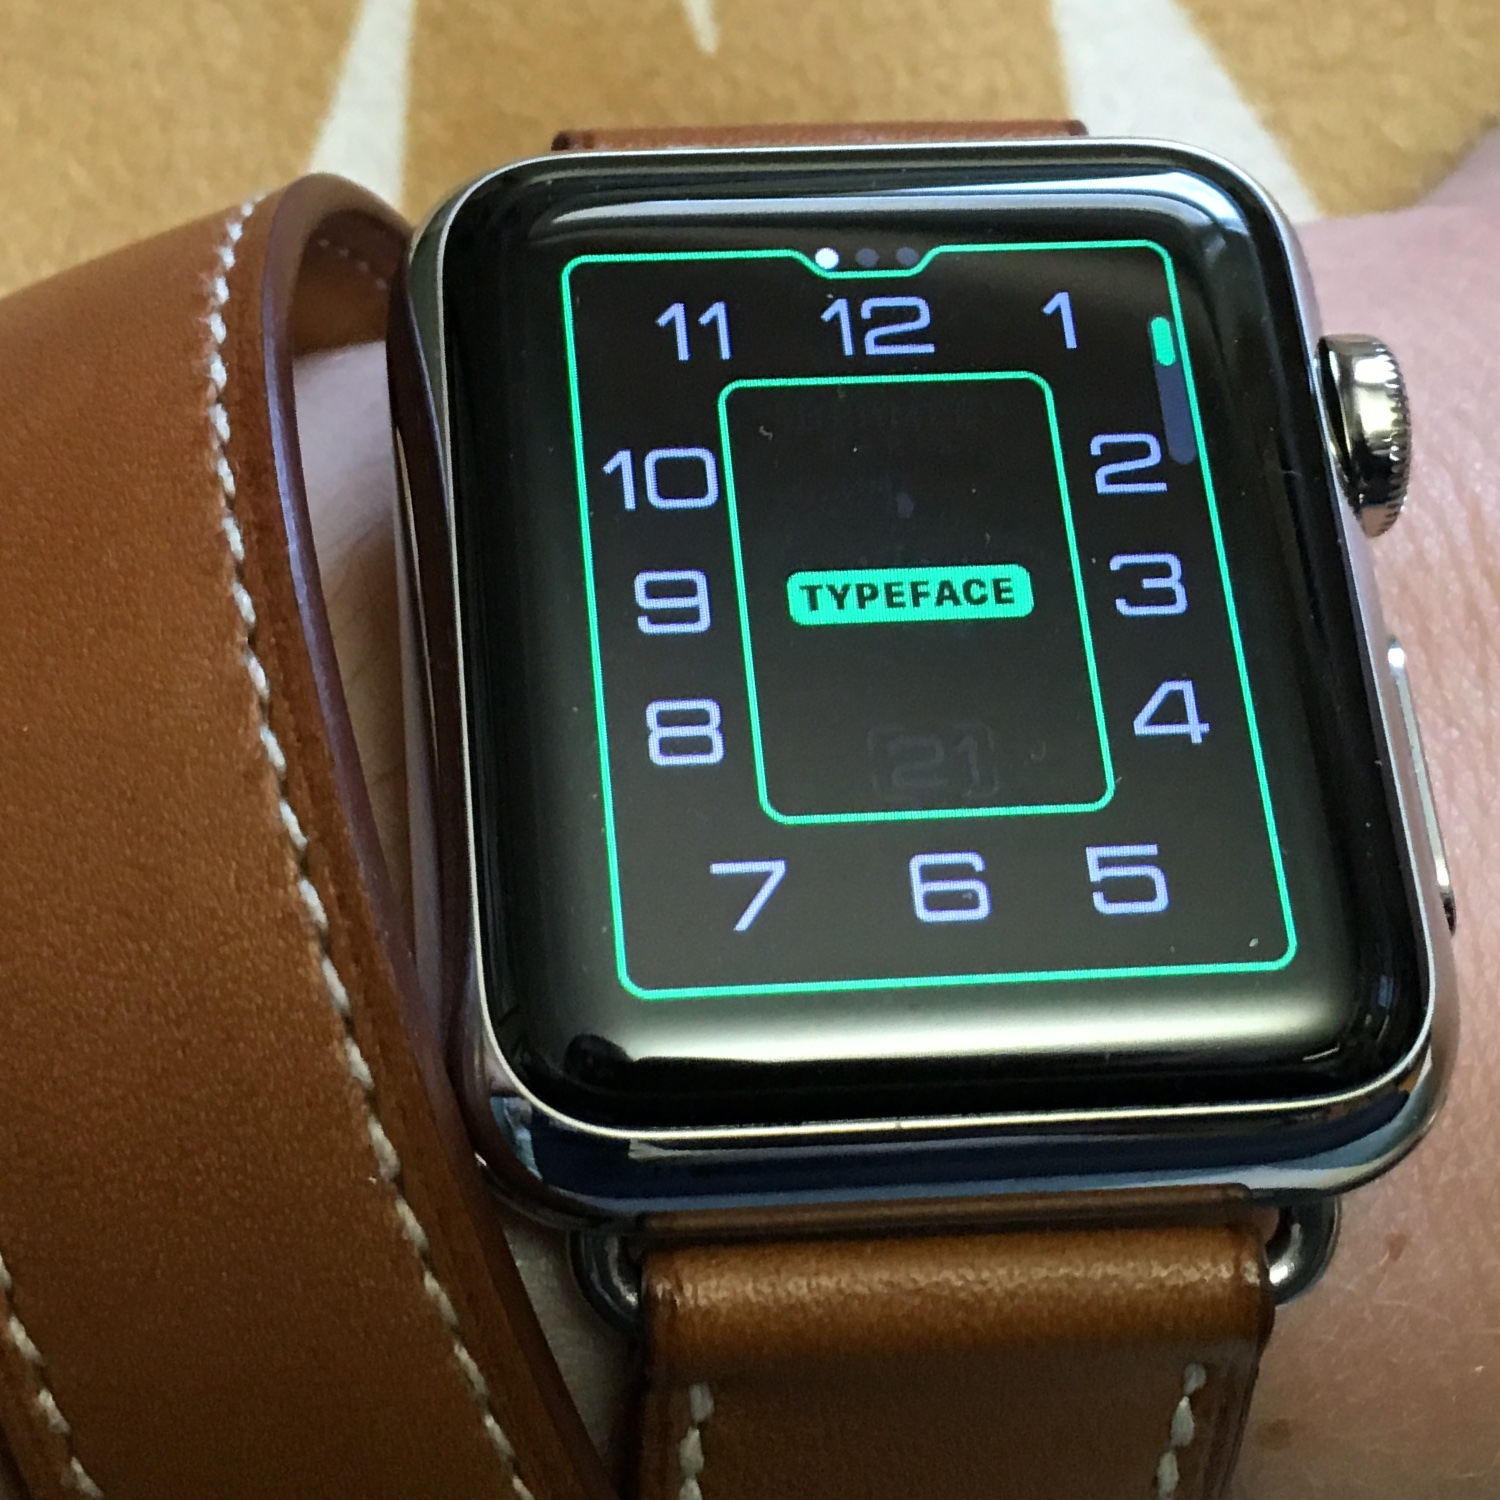 The Hermes custom Apple Watch face gives me hope for third-party clock